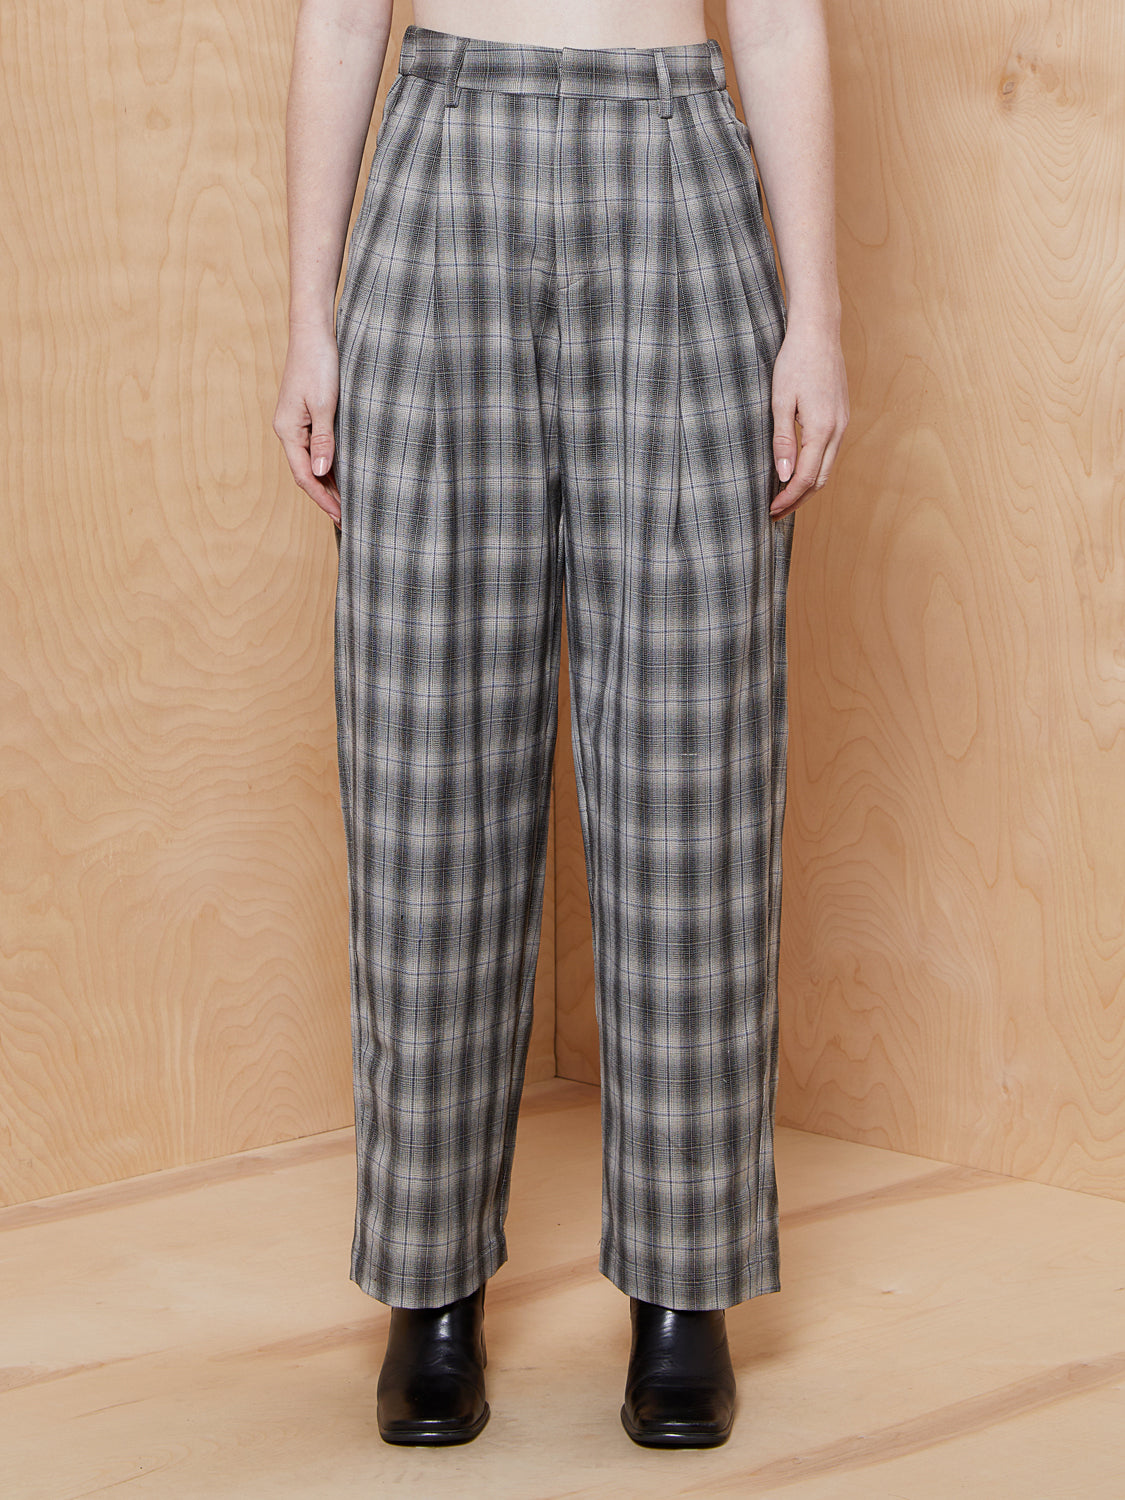 Urban Outfitters Lightweight Plaid Trousers